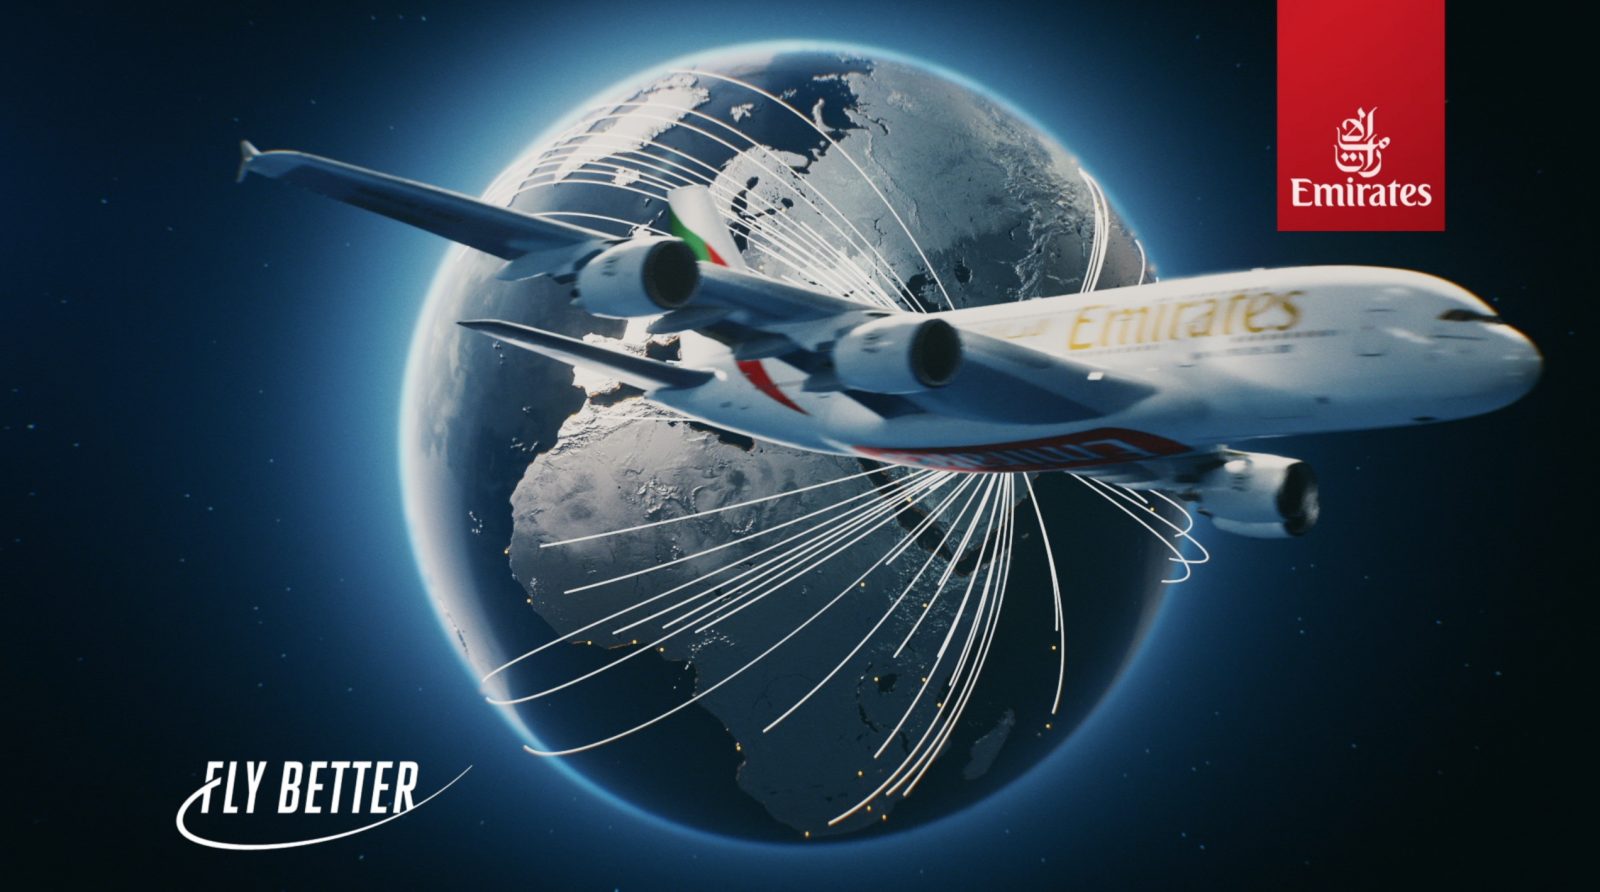 No More "Hello Tomorrow" - Emirates Now Wants You to "Fly Better" in New Global Ad Campaign